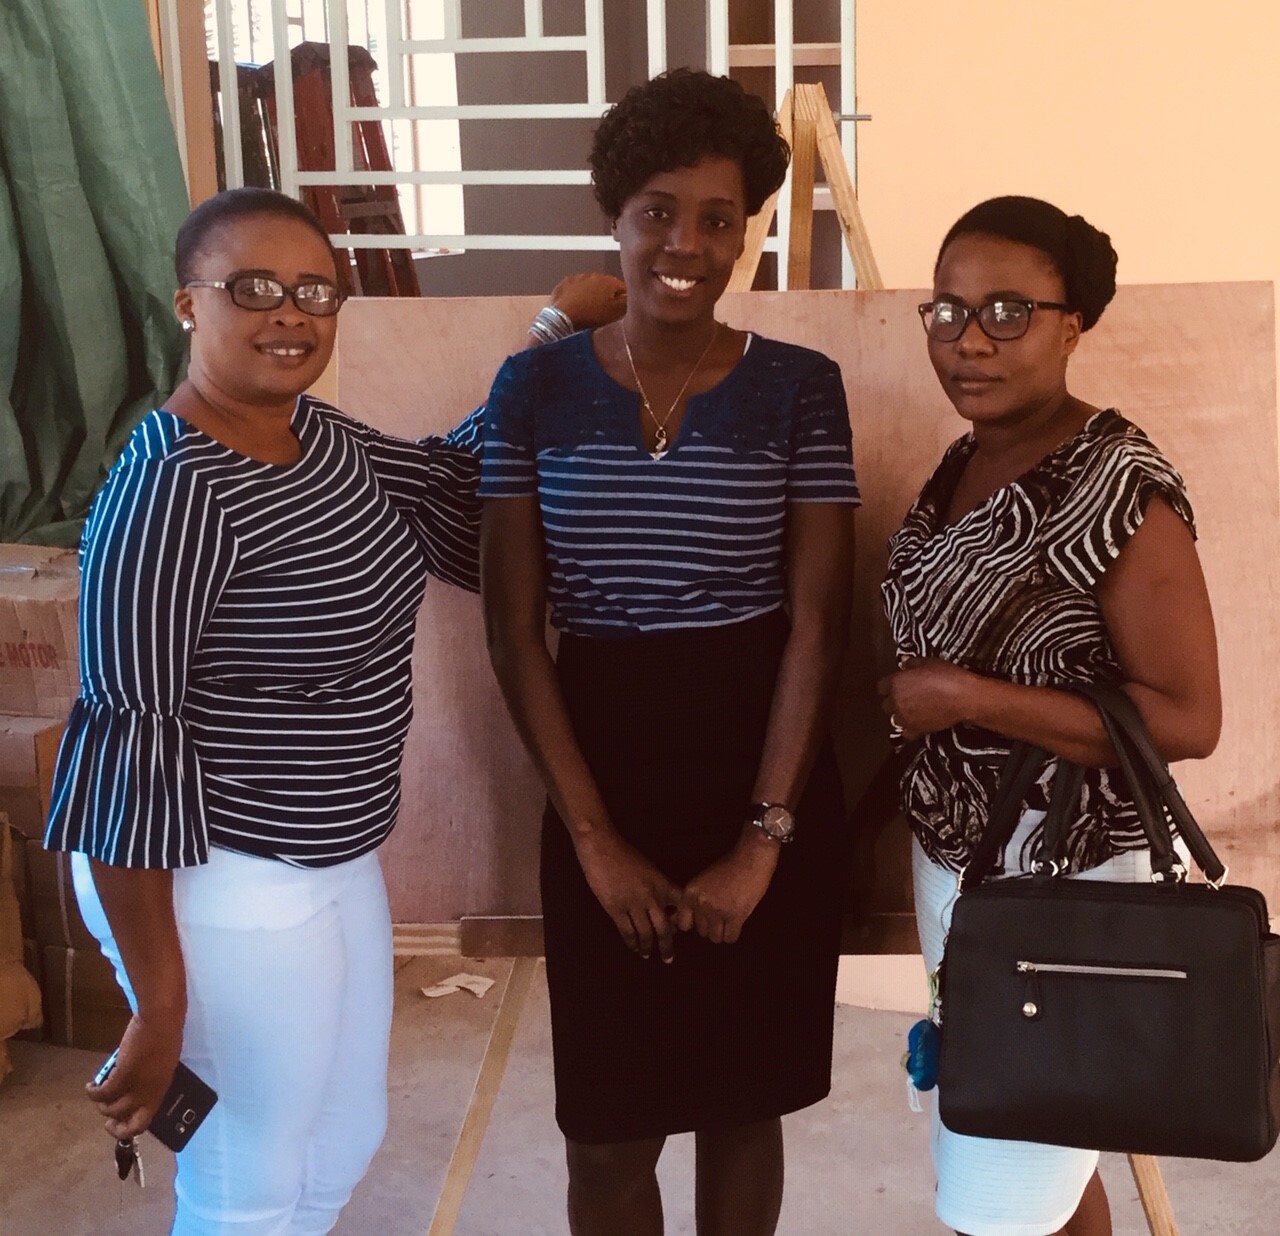 A big thank you from the staff and 24 students at the sewing school in Cap Haitian, Haiti. The pic directly below (left to right) shows .. our Business Director, our Registered Nurse (Clinic), and Sewing Instructor.jpg